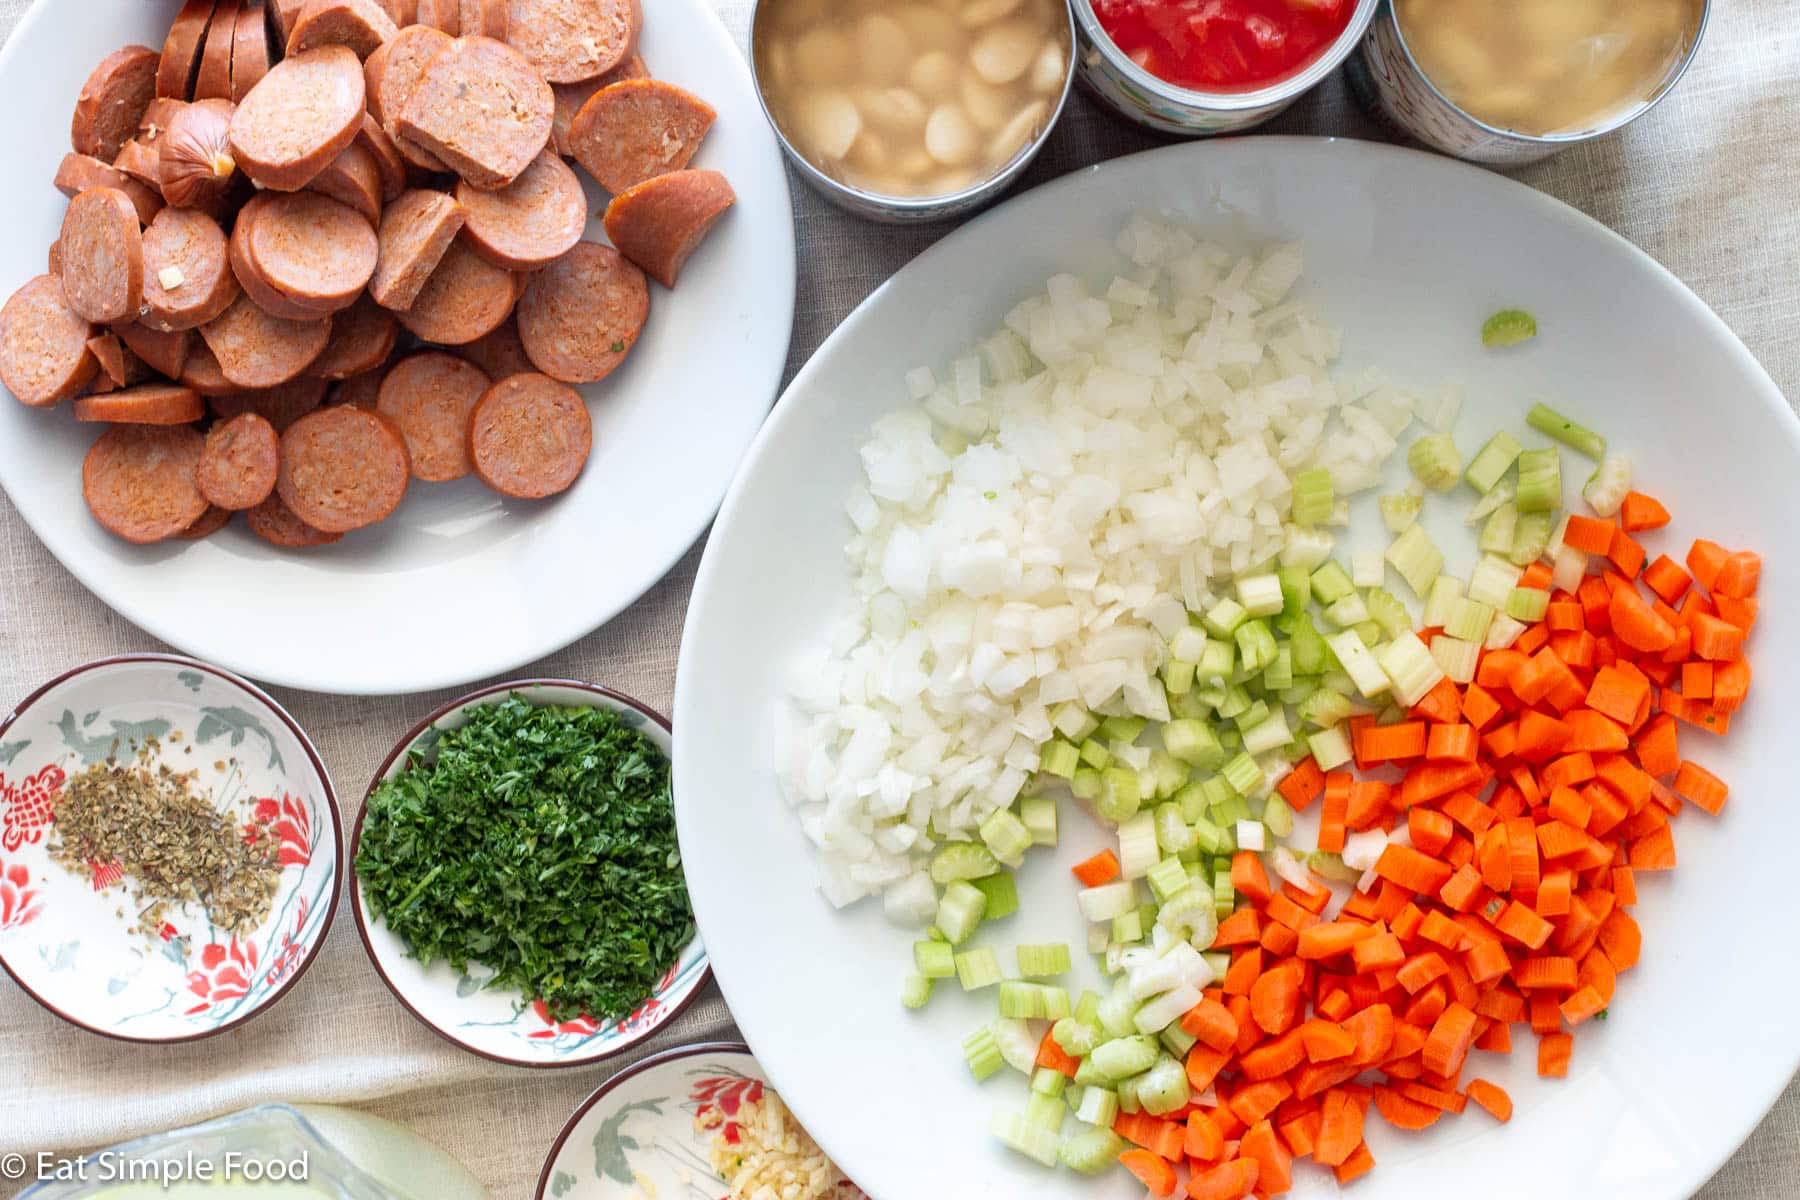 Chopped onion, celery, carrot on a white plate. Sliced smoked sausage on a smaller white plate. Three small bowls of Italian seasoning, chopped parsley, and chopped garlic on the side.